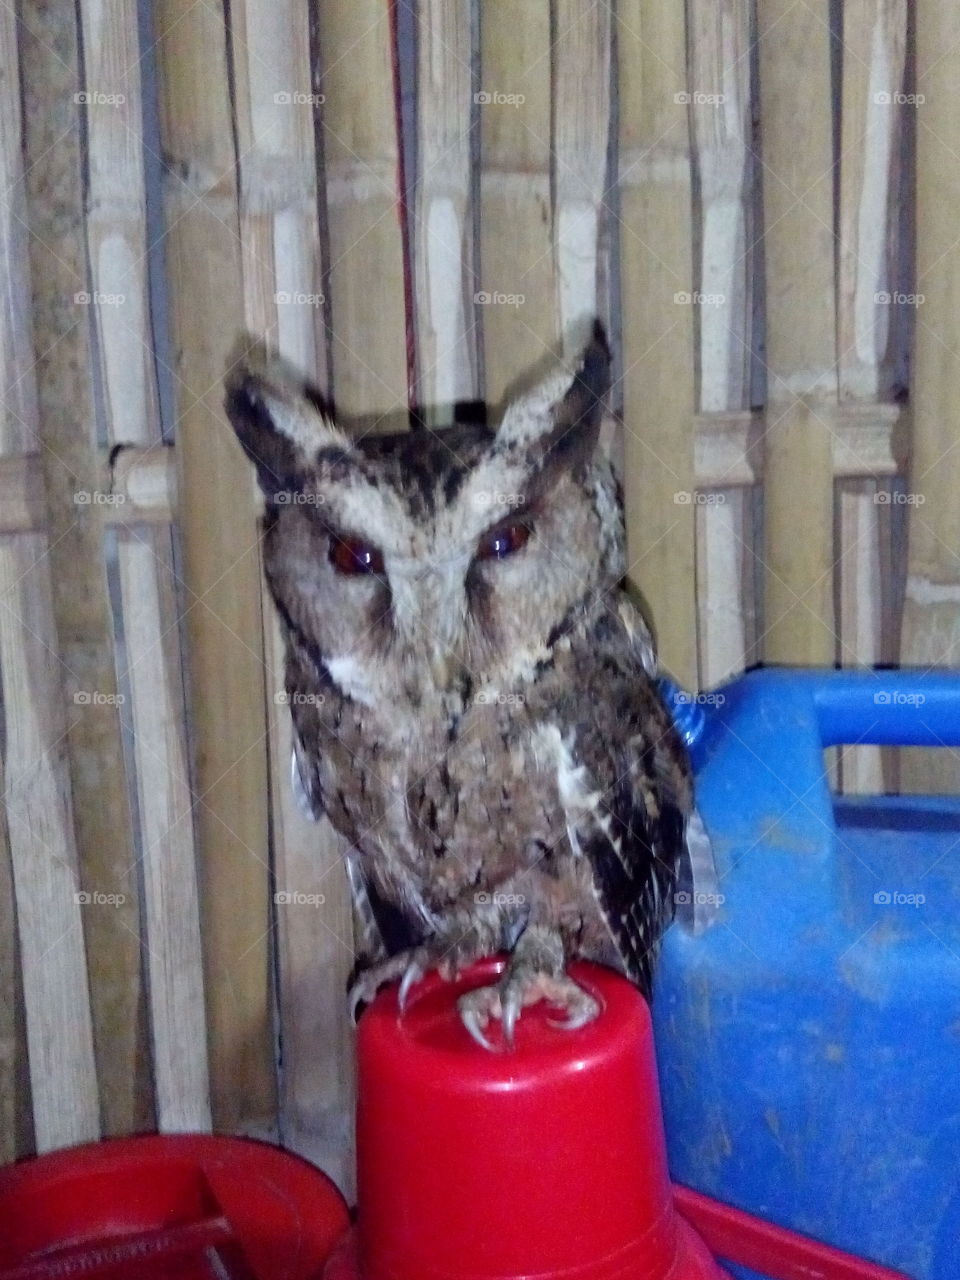 the owl visit our home one night